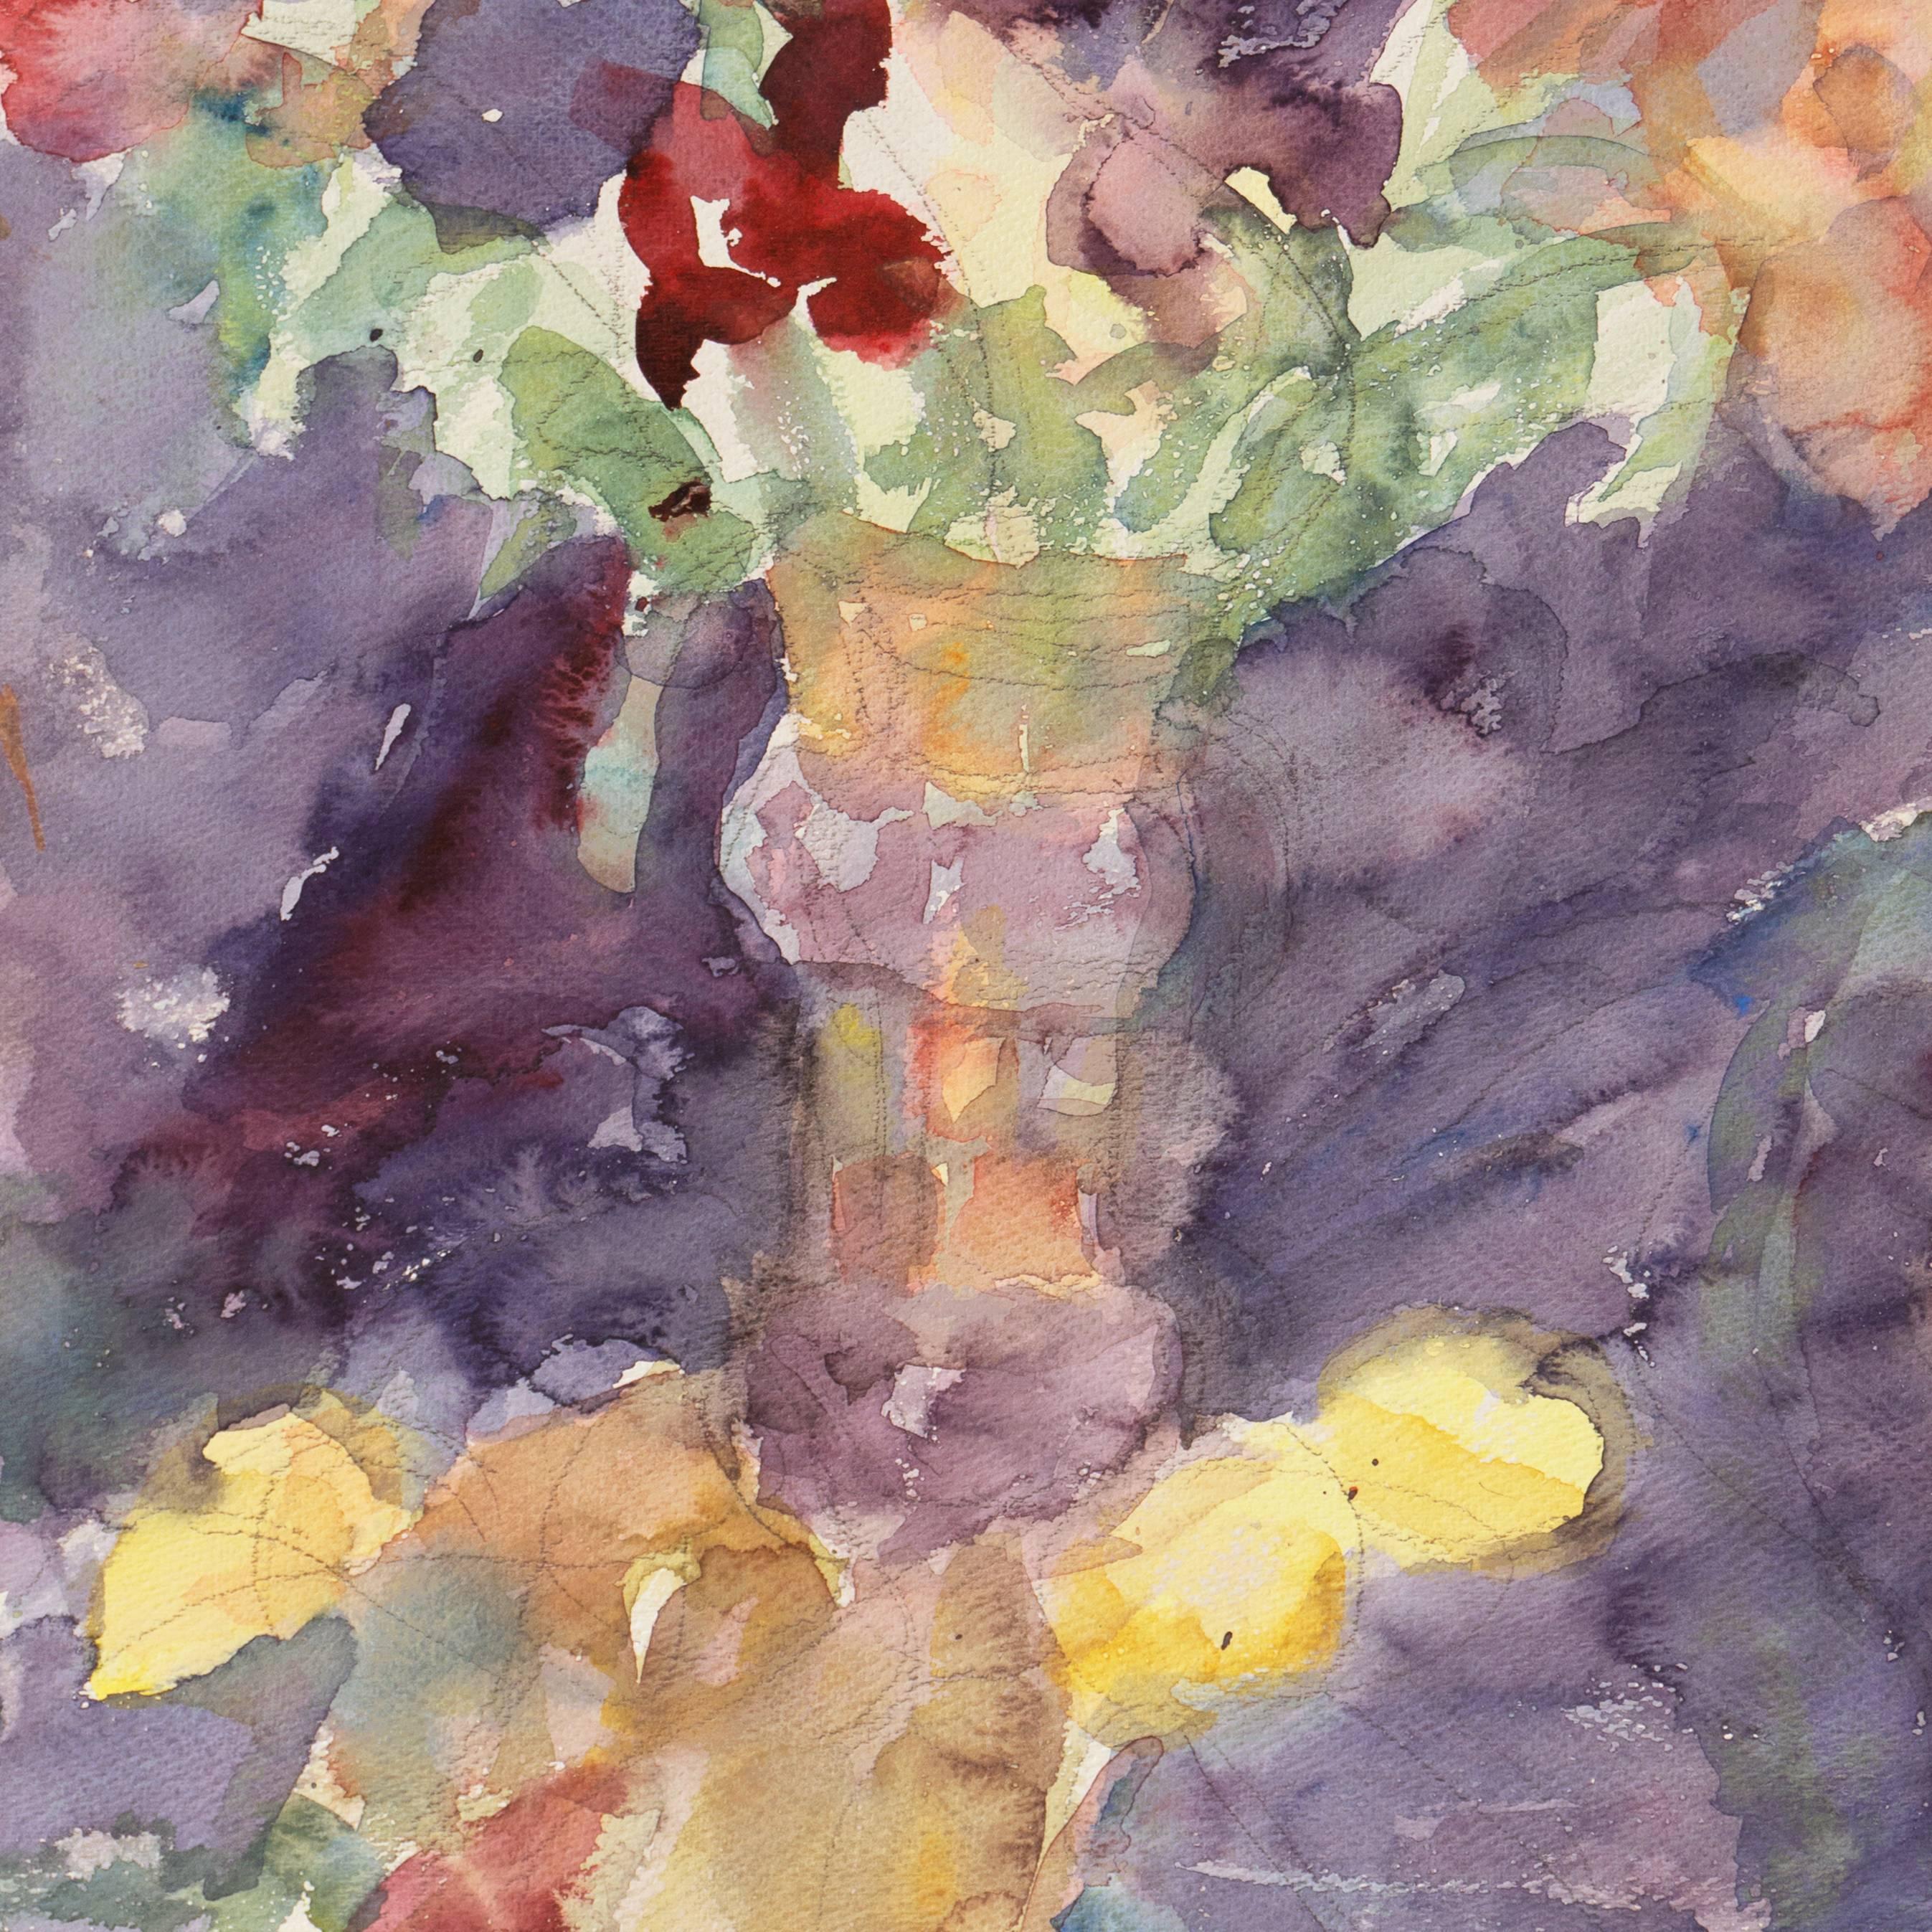 A lyrical watercolor of flowers informally arranged in two vases and contrasted against a lilac and purple background.

Signed lower left and lower right, 'Ament' for Janet Ament De La Roche (American, 1916-2000); additionally stamped verso with